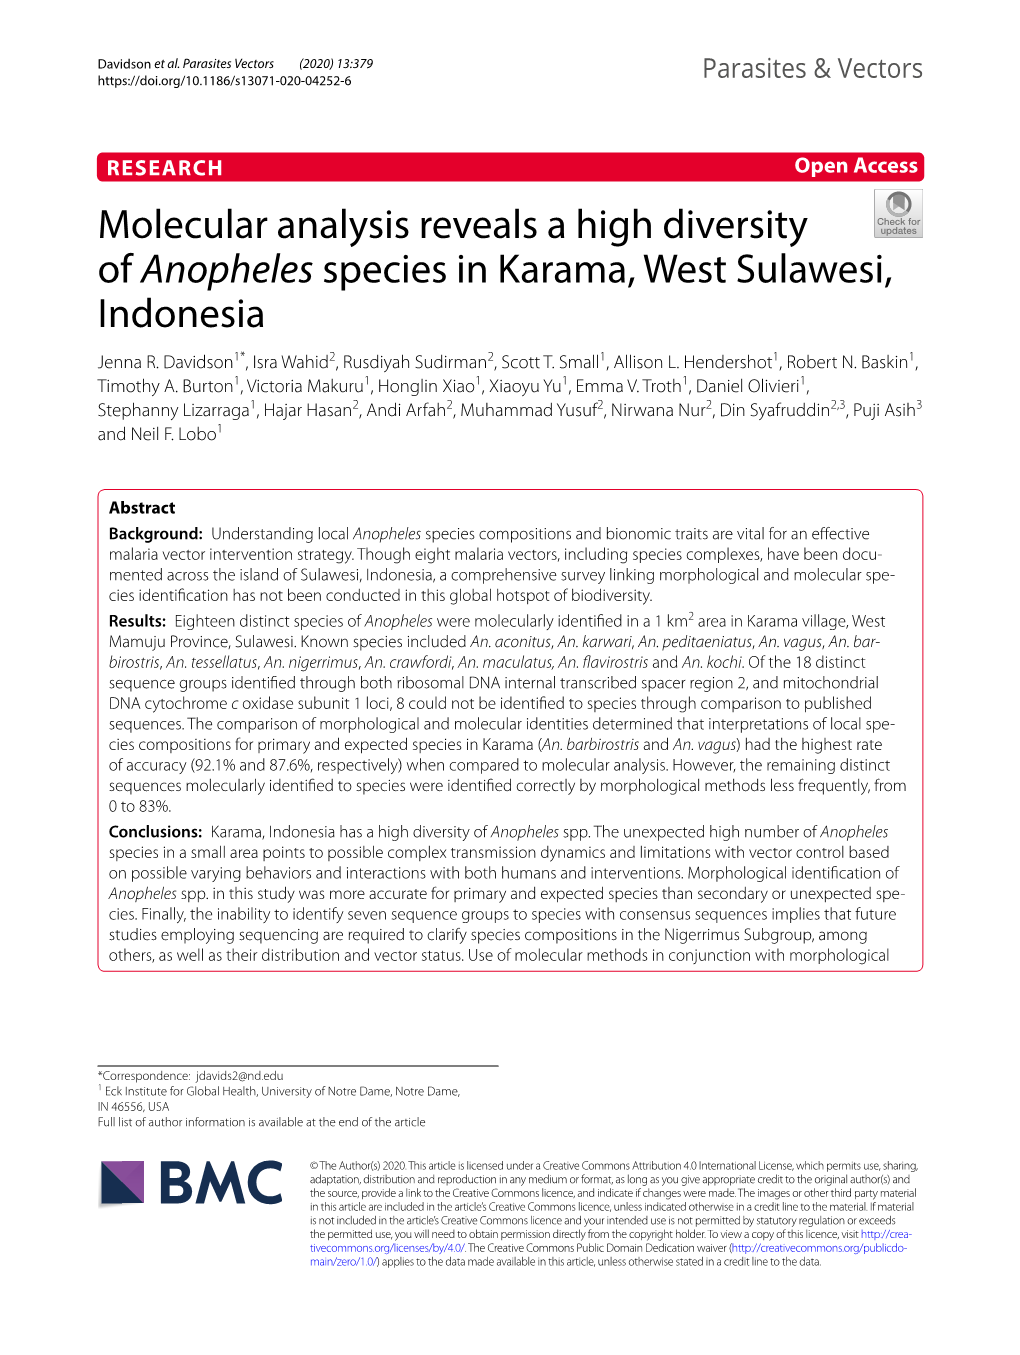 Molecular Analysis Reveals a High Diversity of Anopheles Species in Karama, West Sulawesi, Indonesia Jenna R